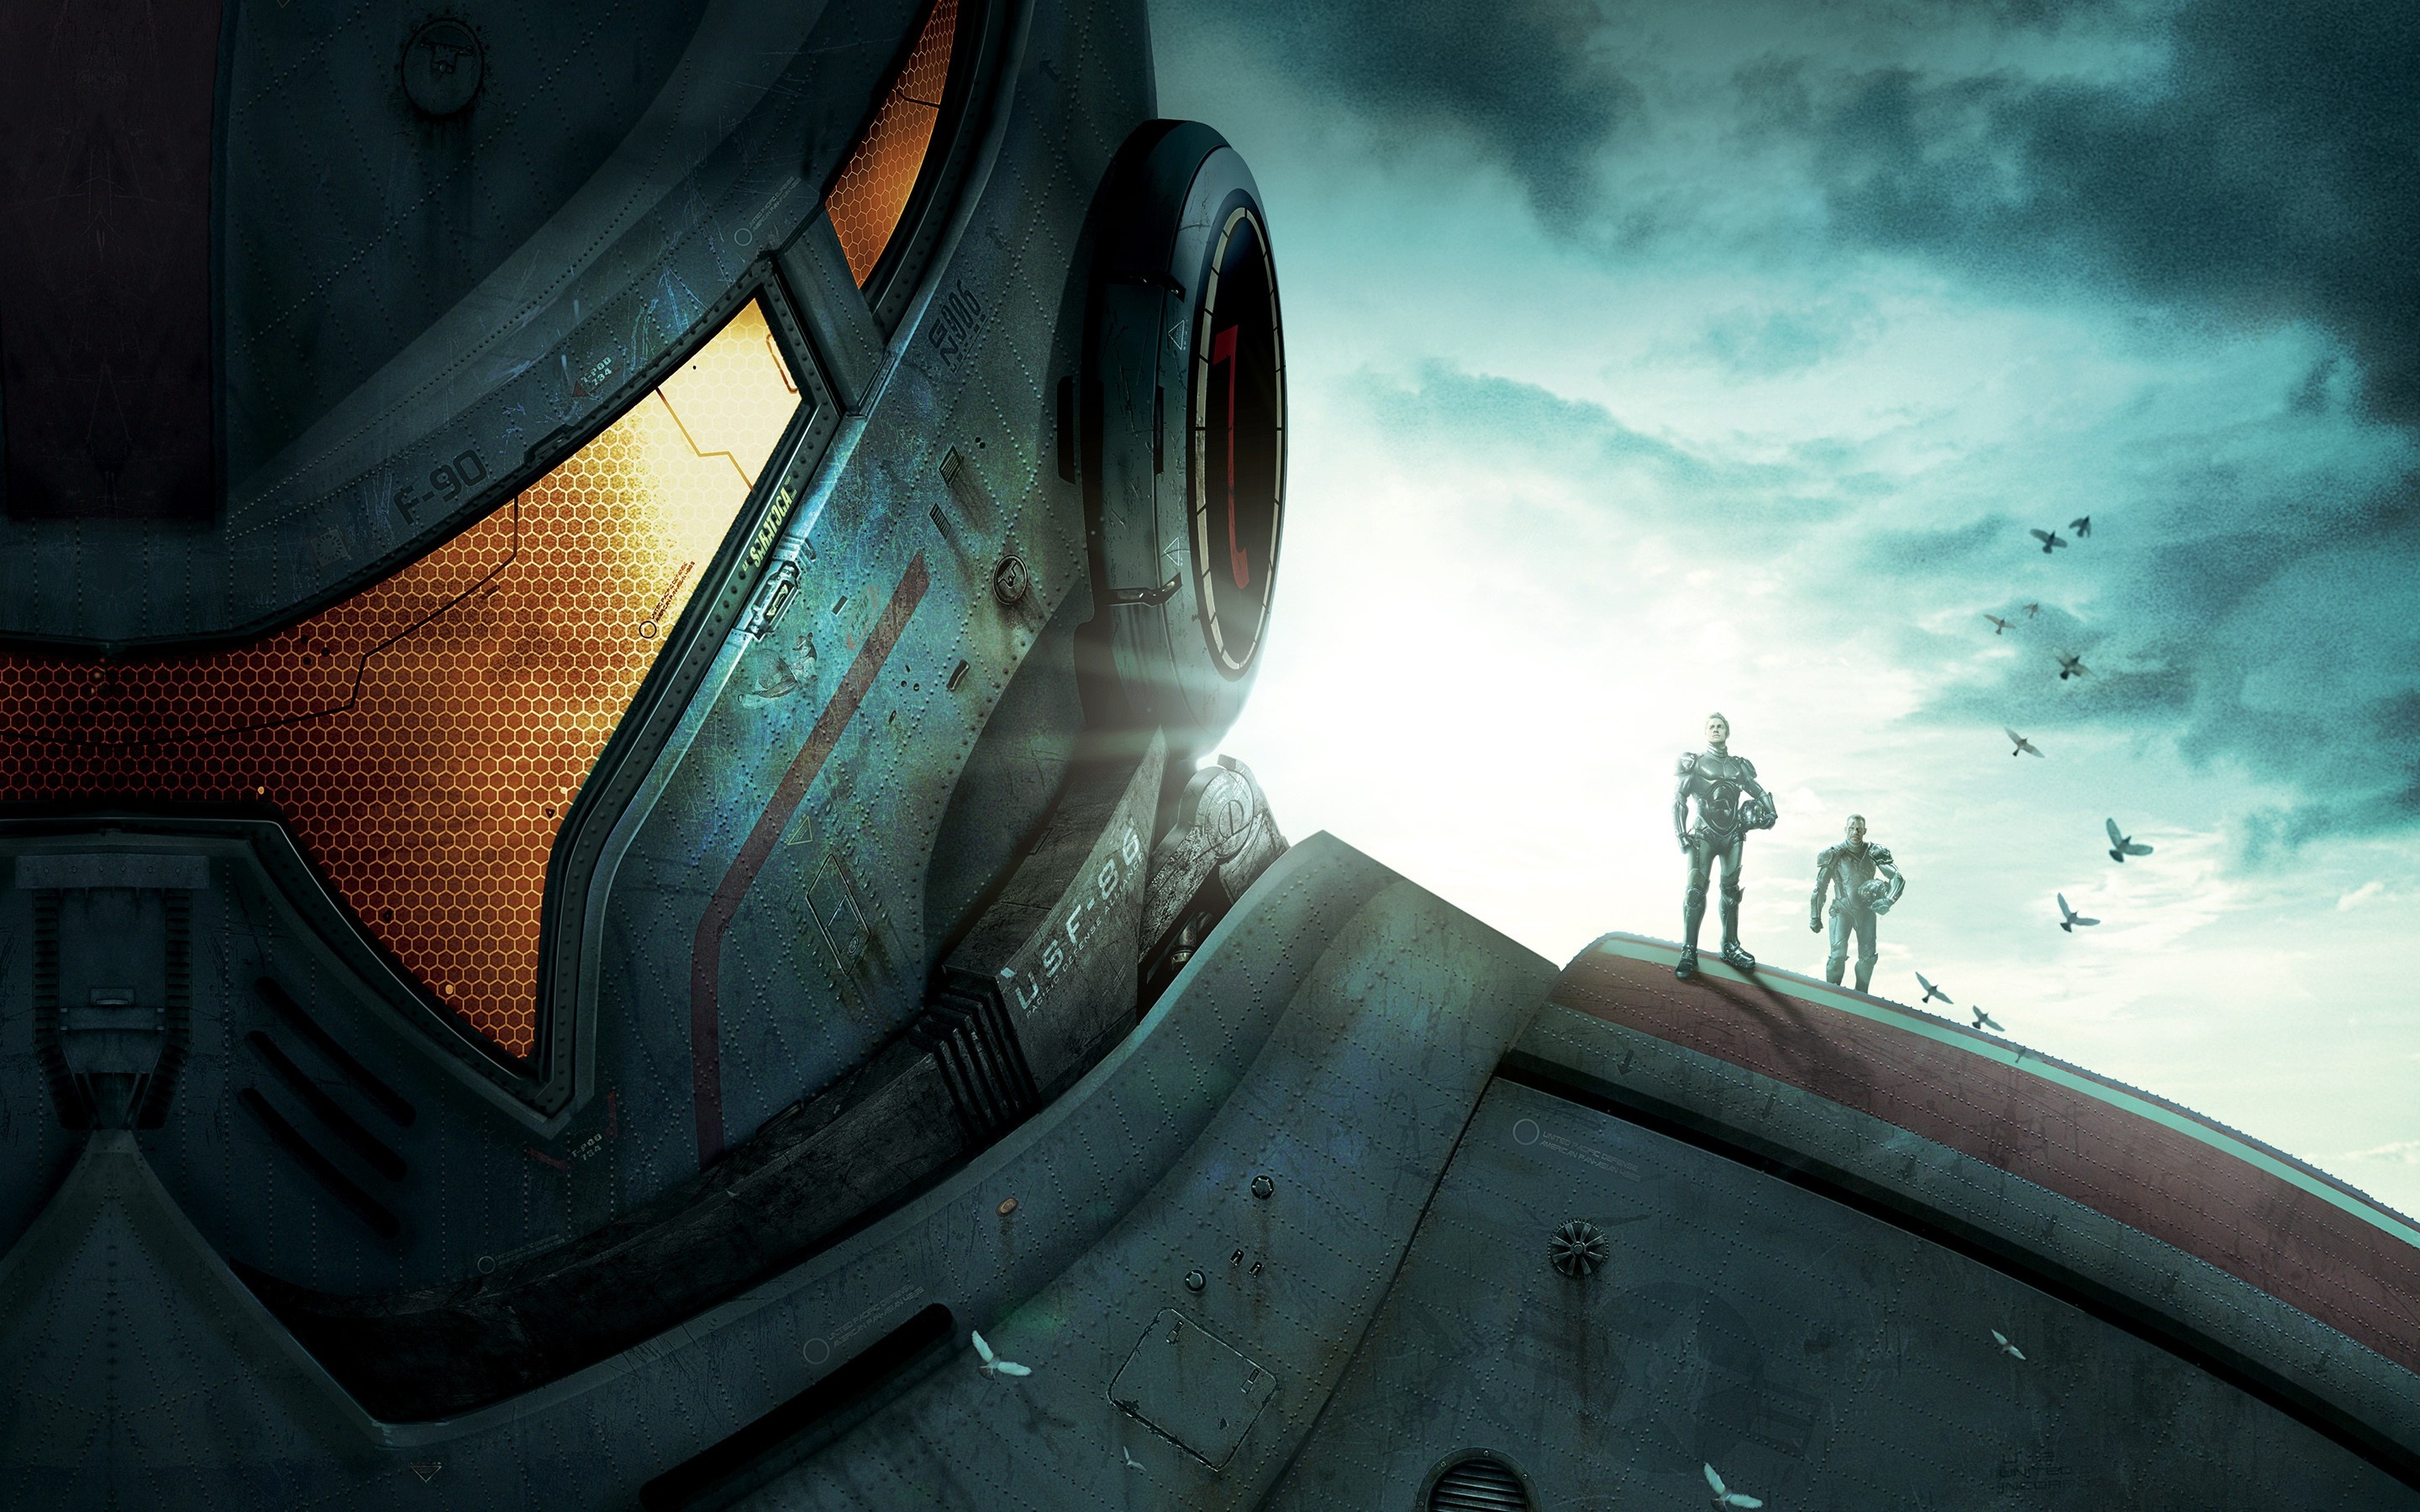 Pacific Rim, Chaos wallpapers, Action-packed scenes, Sci-fi adventure, 2880x1800 HD Desktop